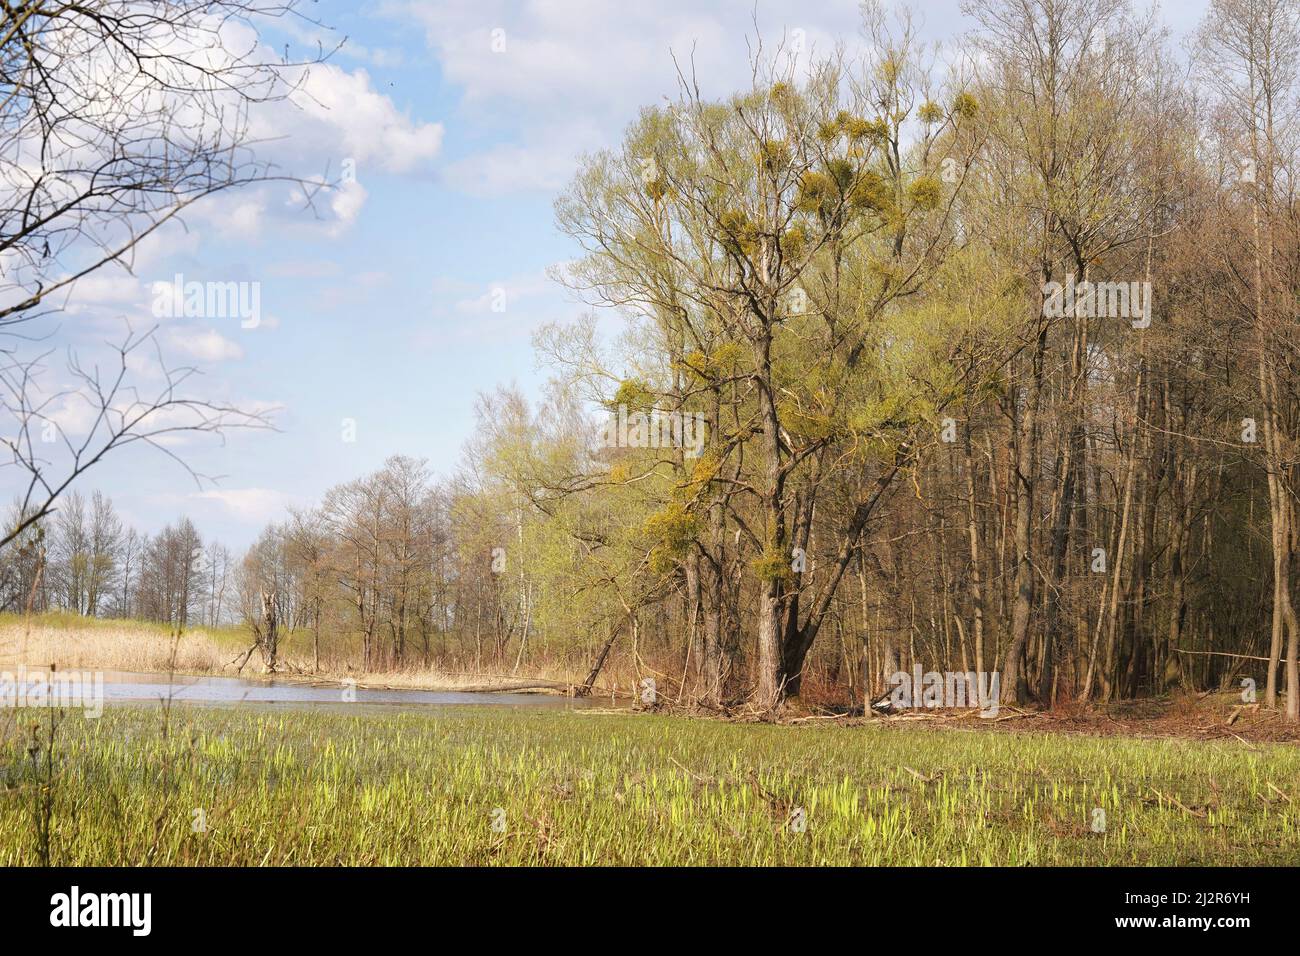 April in the Biebrza valley, forest edge and spring floodplains, sunny landscape with flooded meadow, poplars with mistletoe Stock Photo